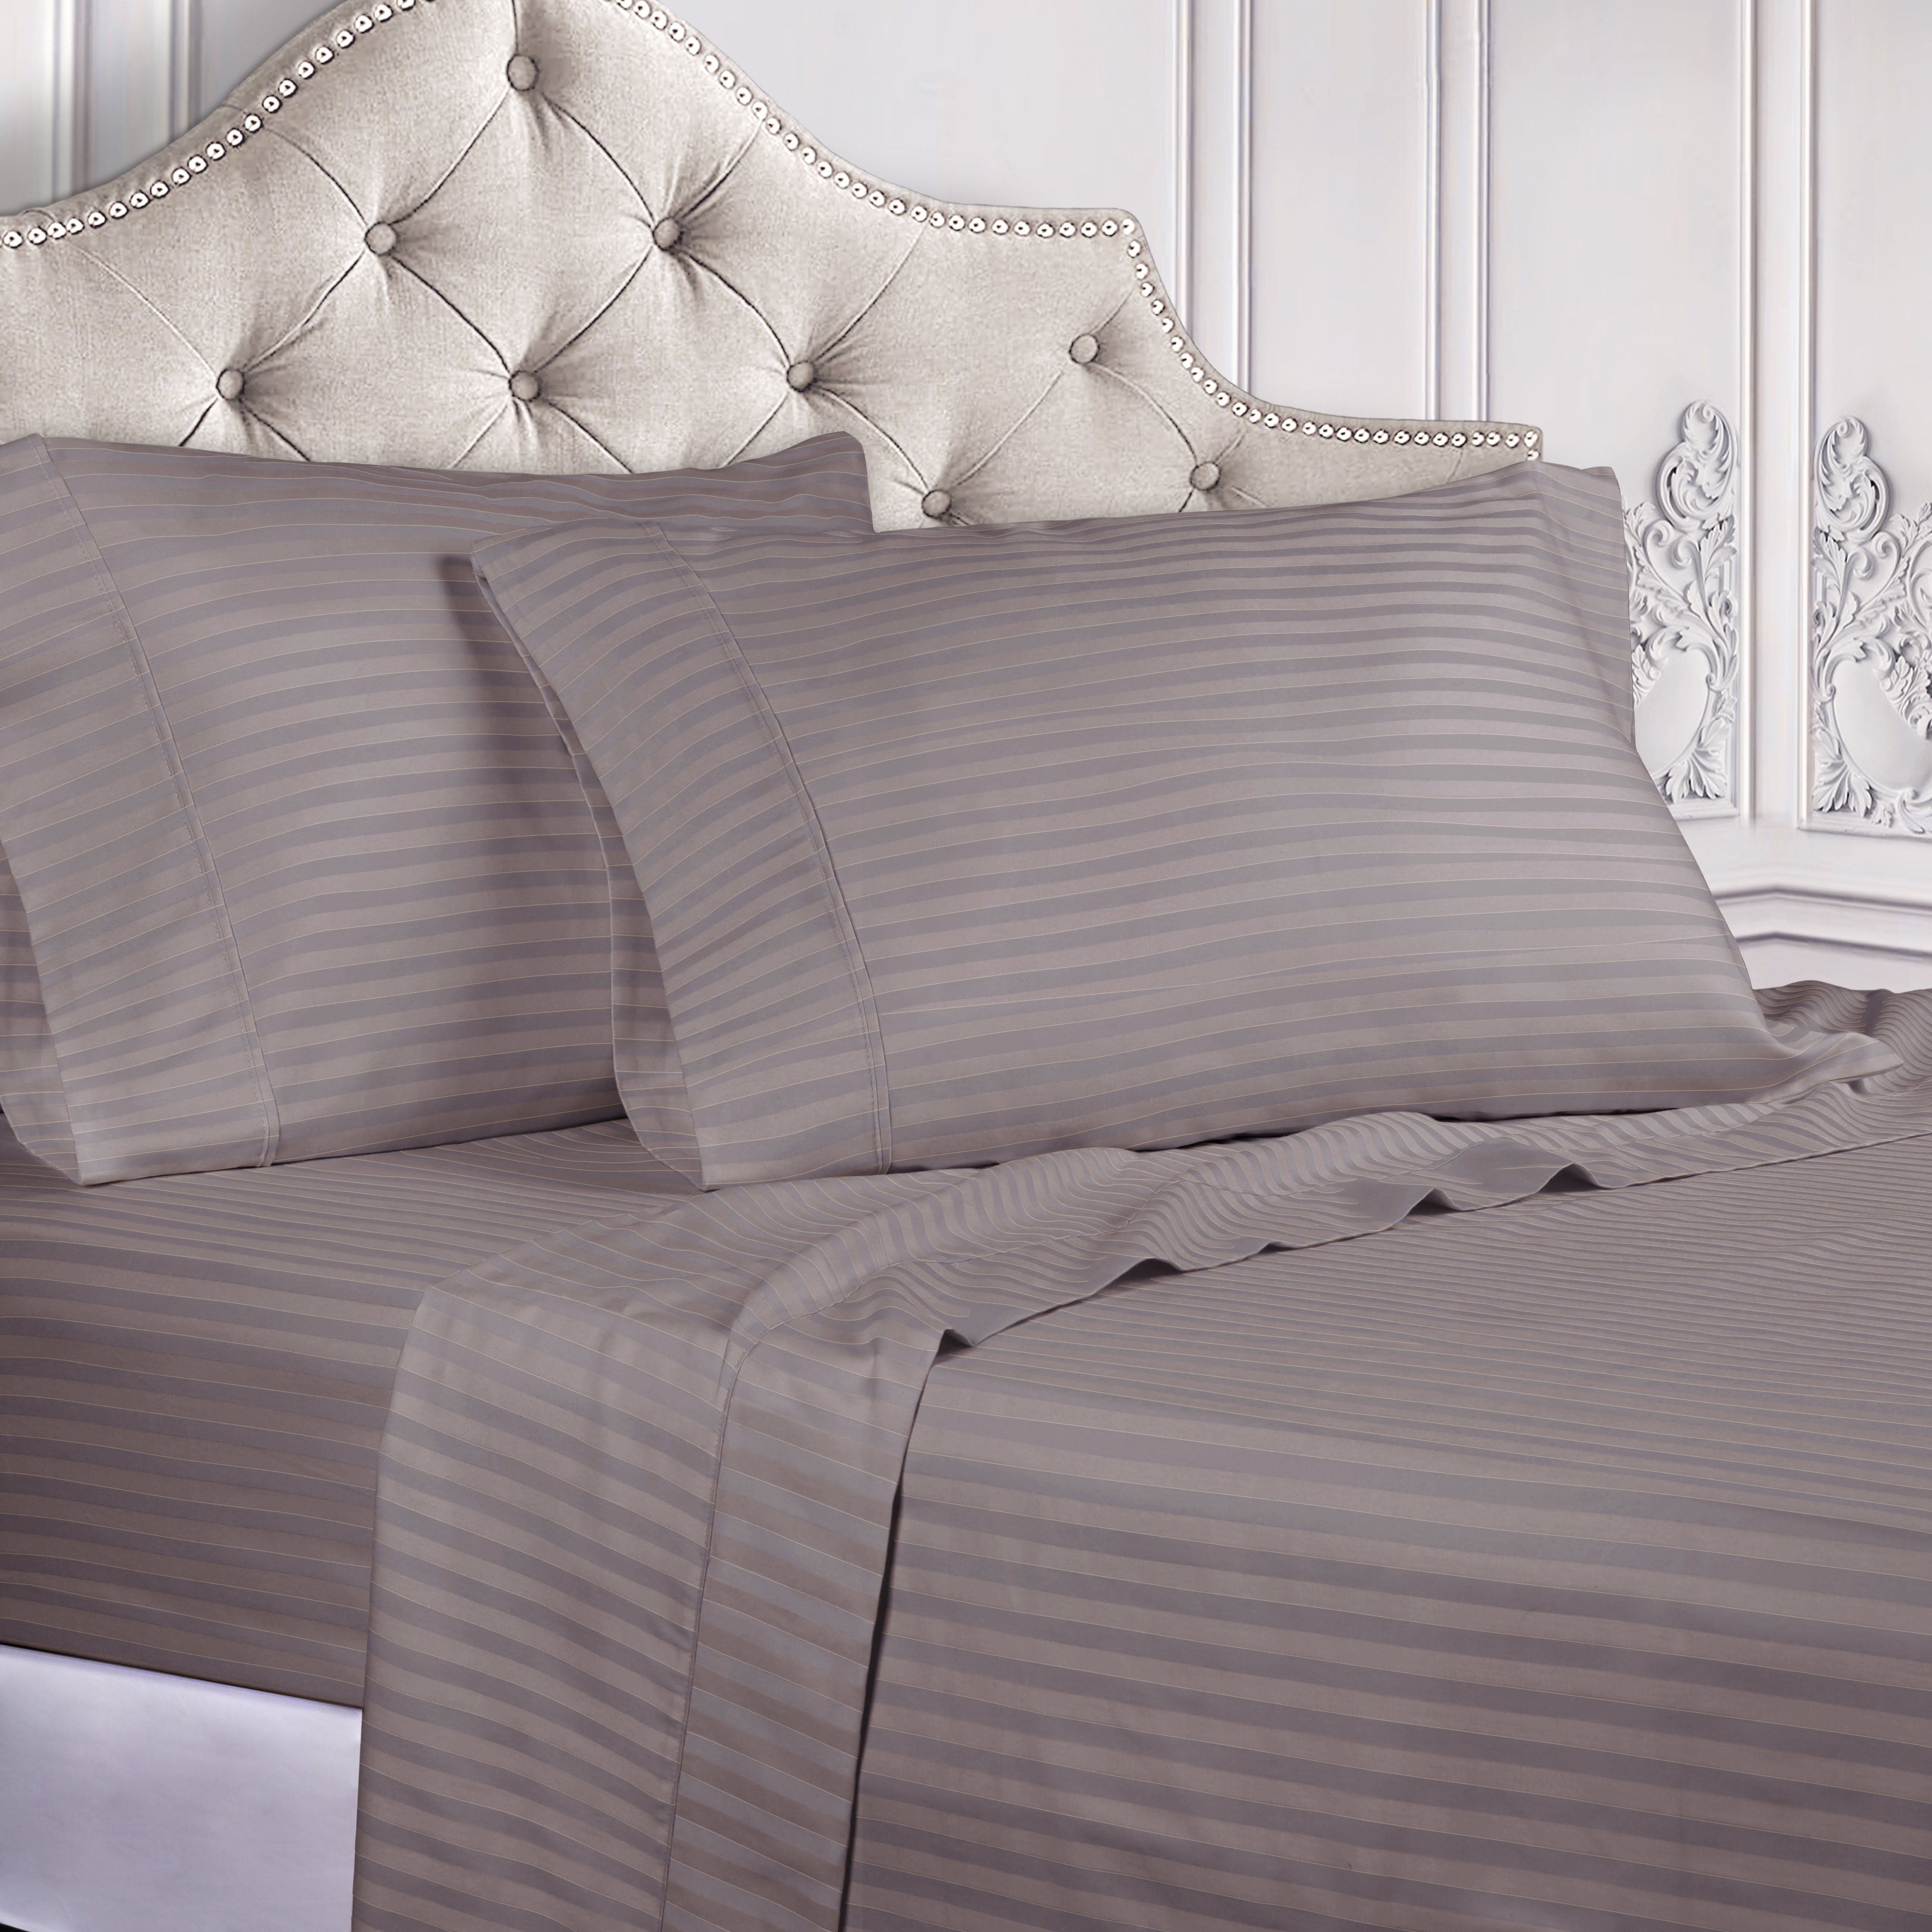 BHS 2 pack Premium Hotel Pillows Striped or Cheque £30rrp 650GRAMS PER PILLOW!!! 